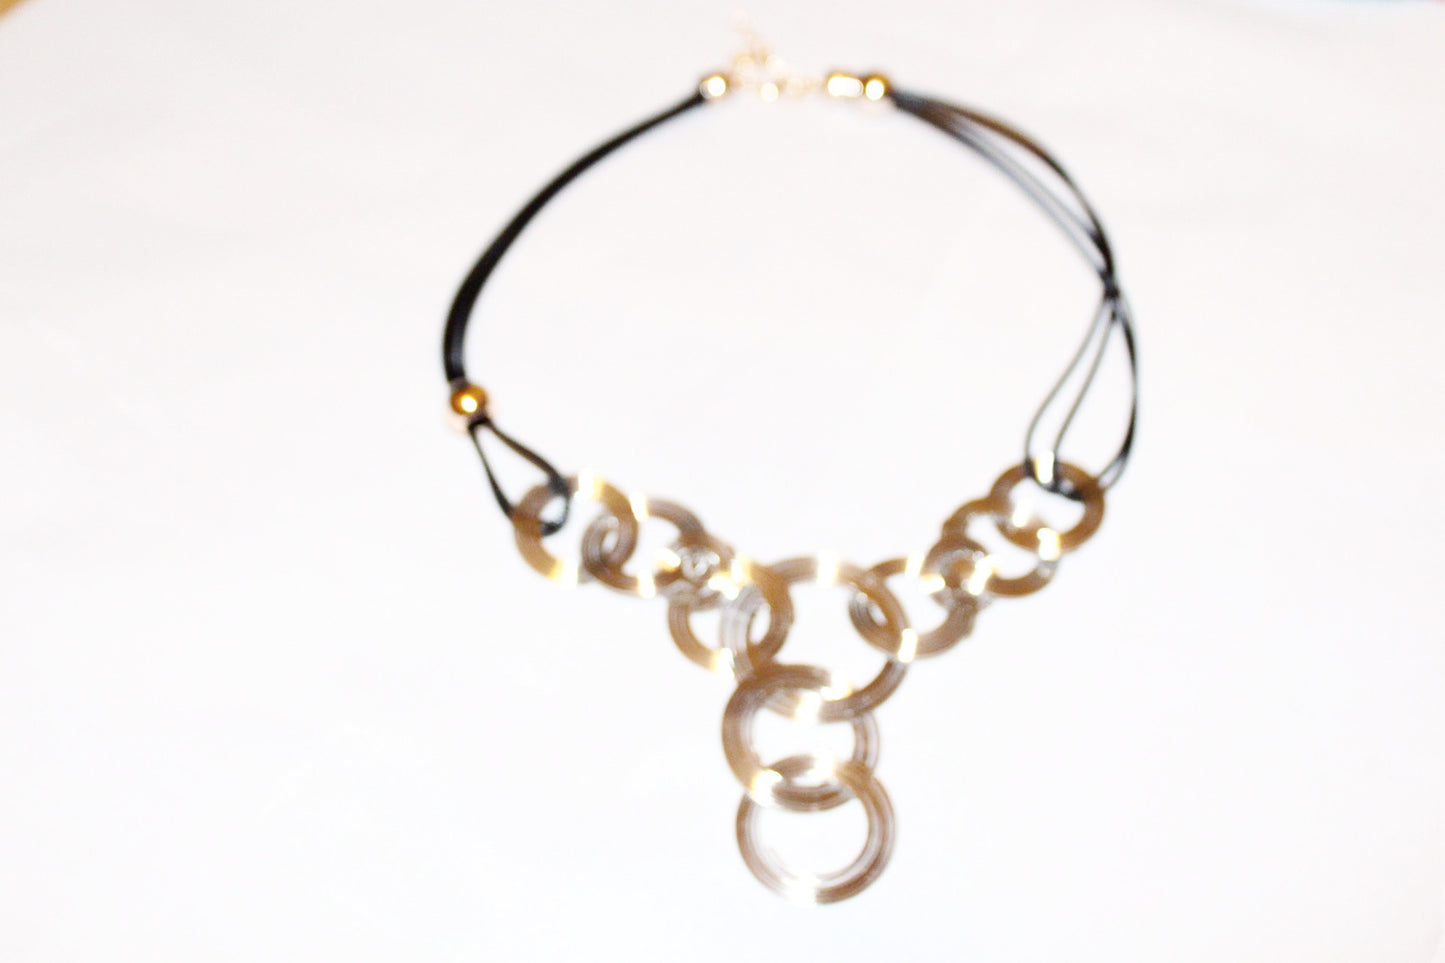 Rope necklace - silver statement necklace